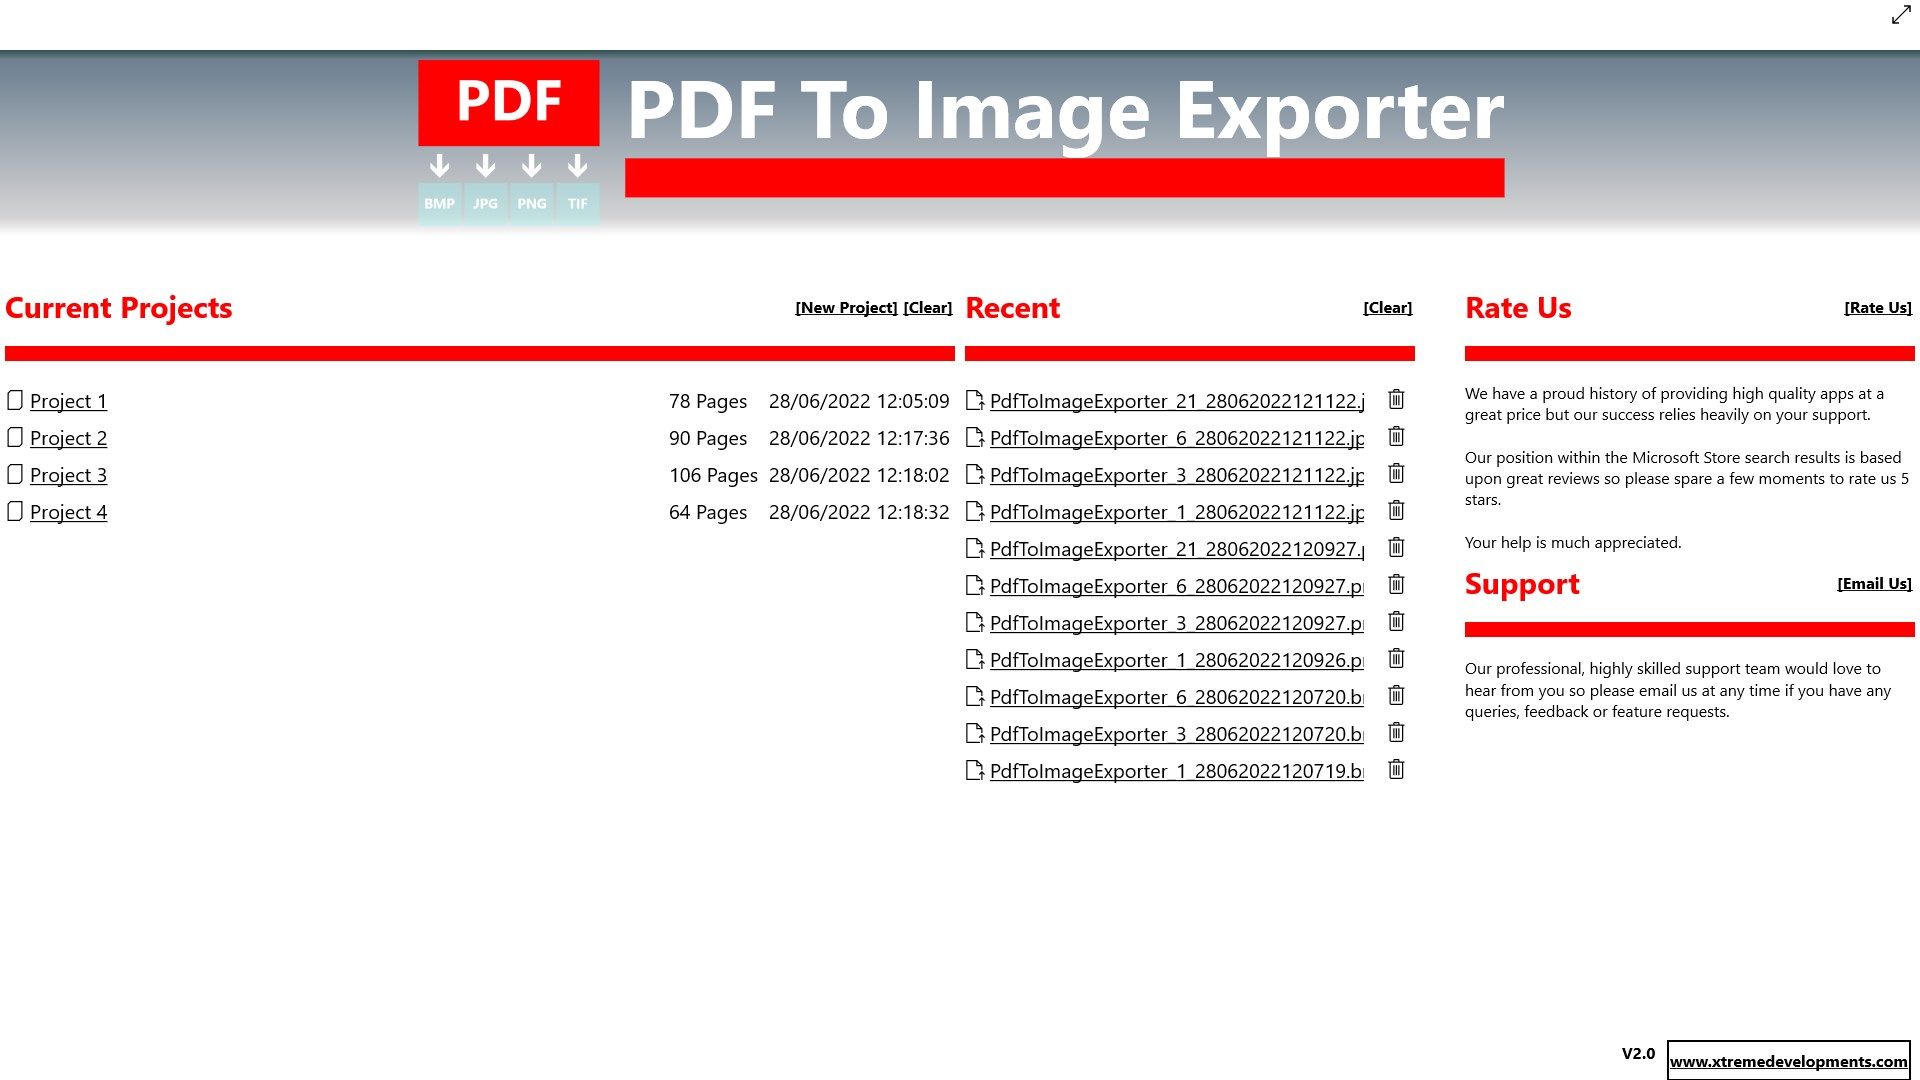 Create new PDF TO Image Exporter projects or navigate to one you are already working on via our convenient dashboard. Open previously created images with ease and view our support contact details so you can easily get in touch with any queries you may have.